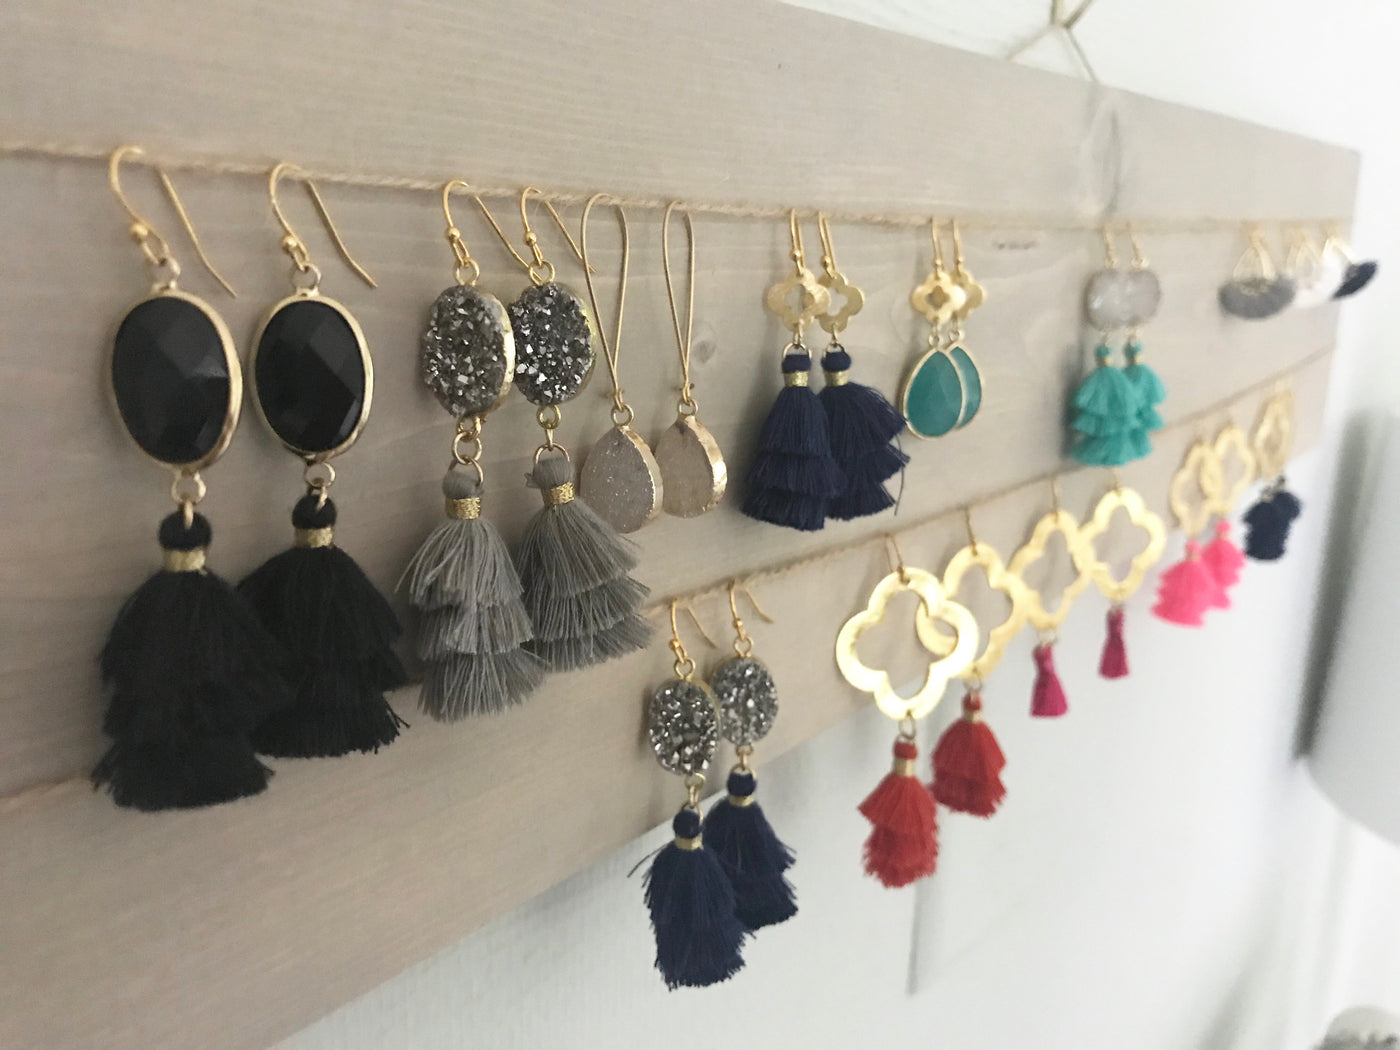 Here's a clever way to display small items like earrings at your